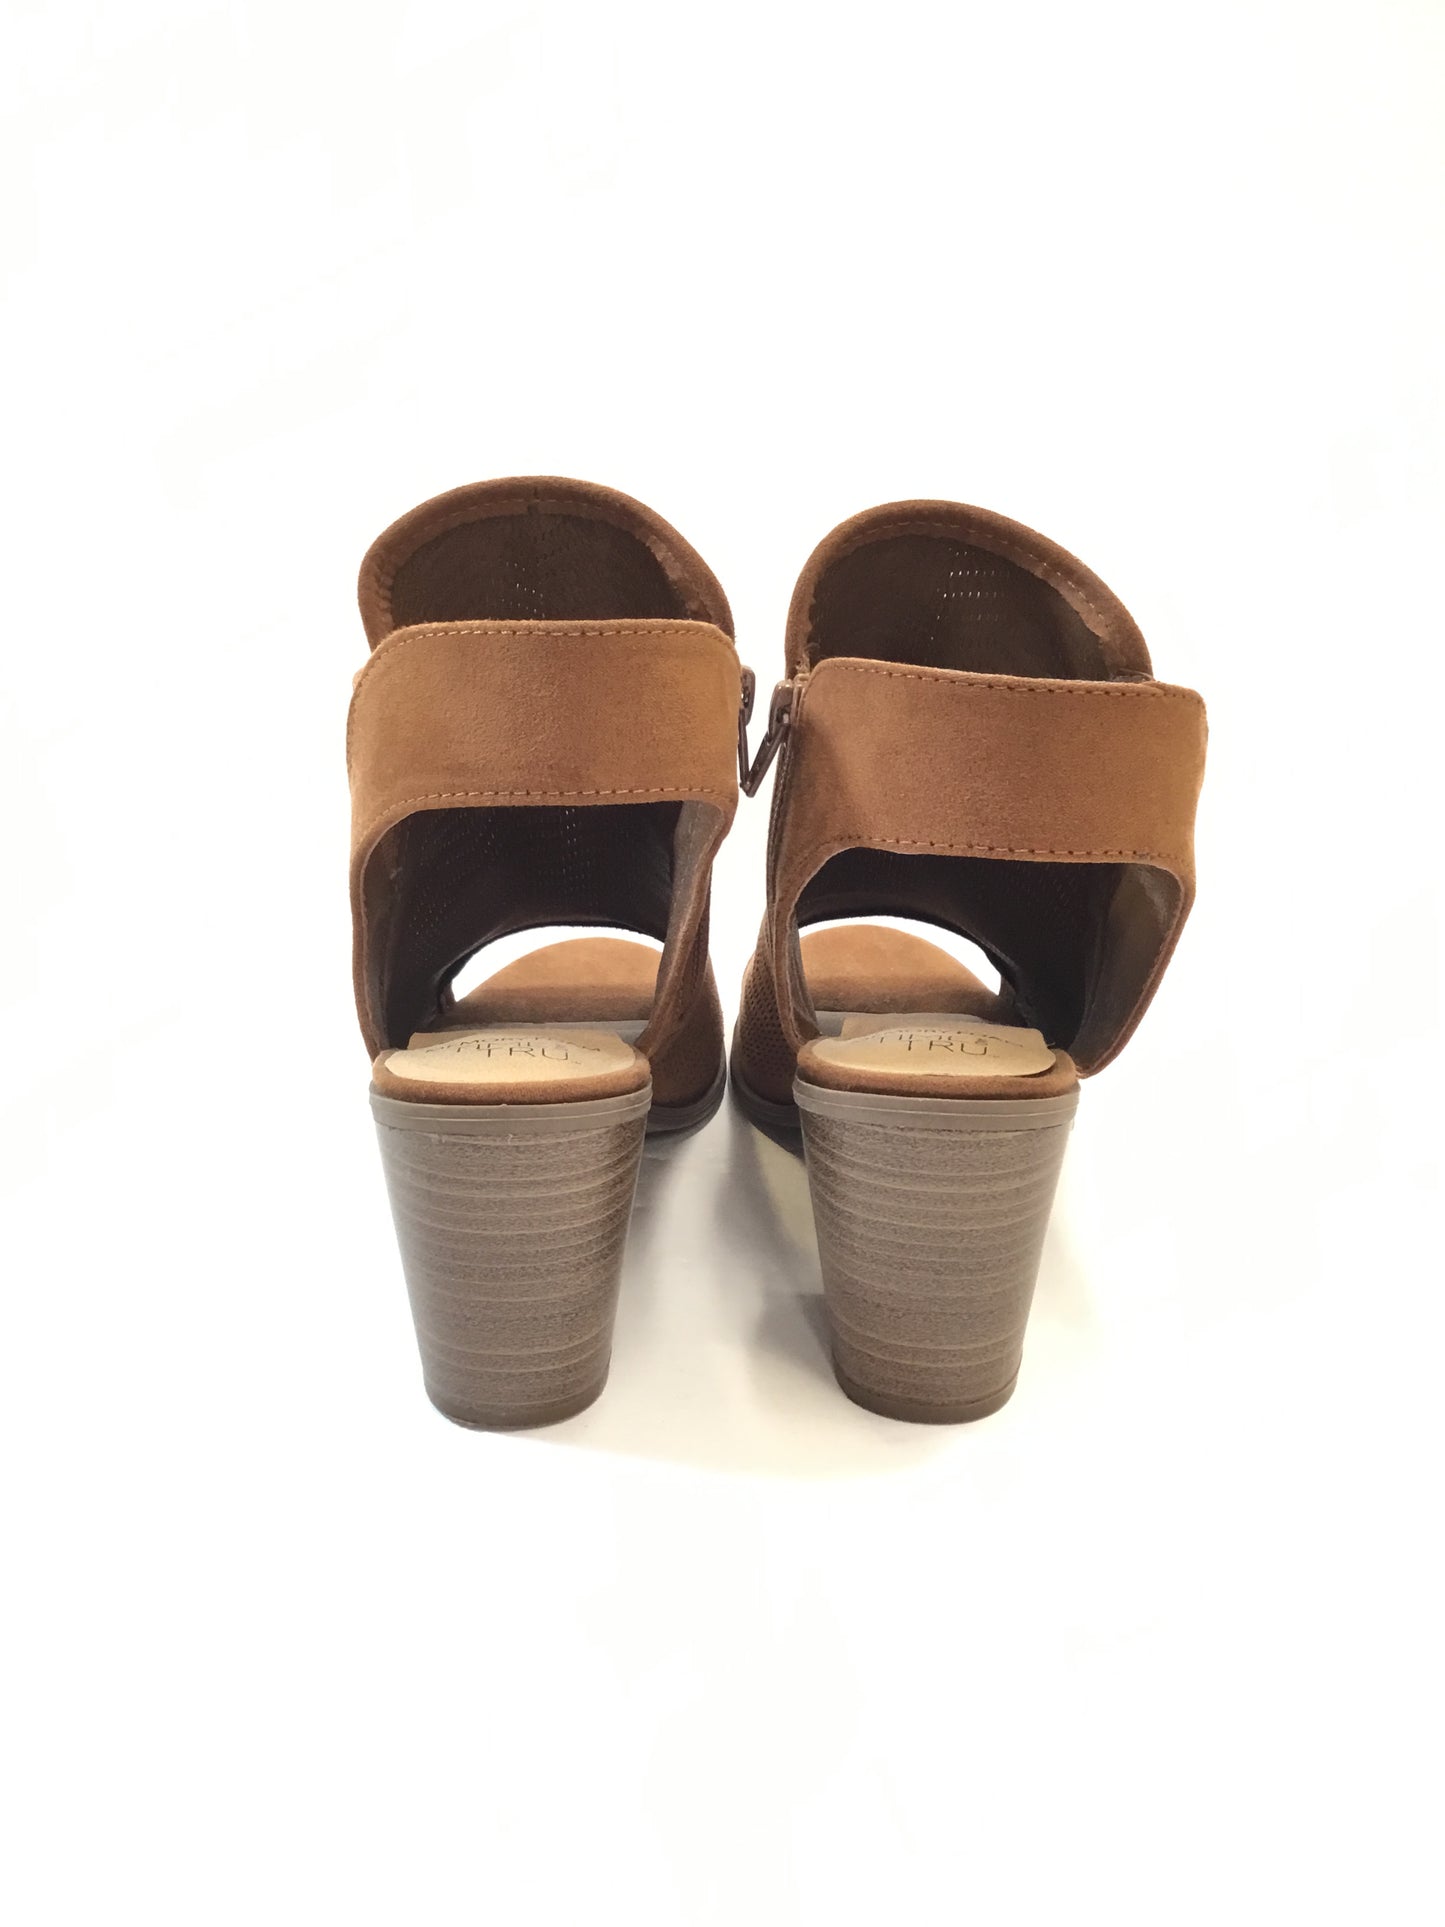 Sandals Heels Block By Time And Tru  Size: 7.5